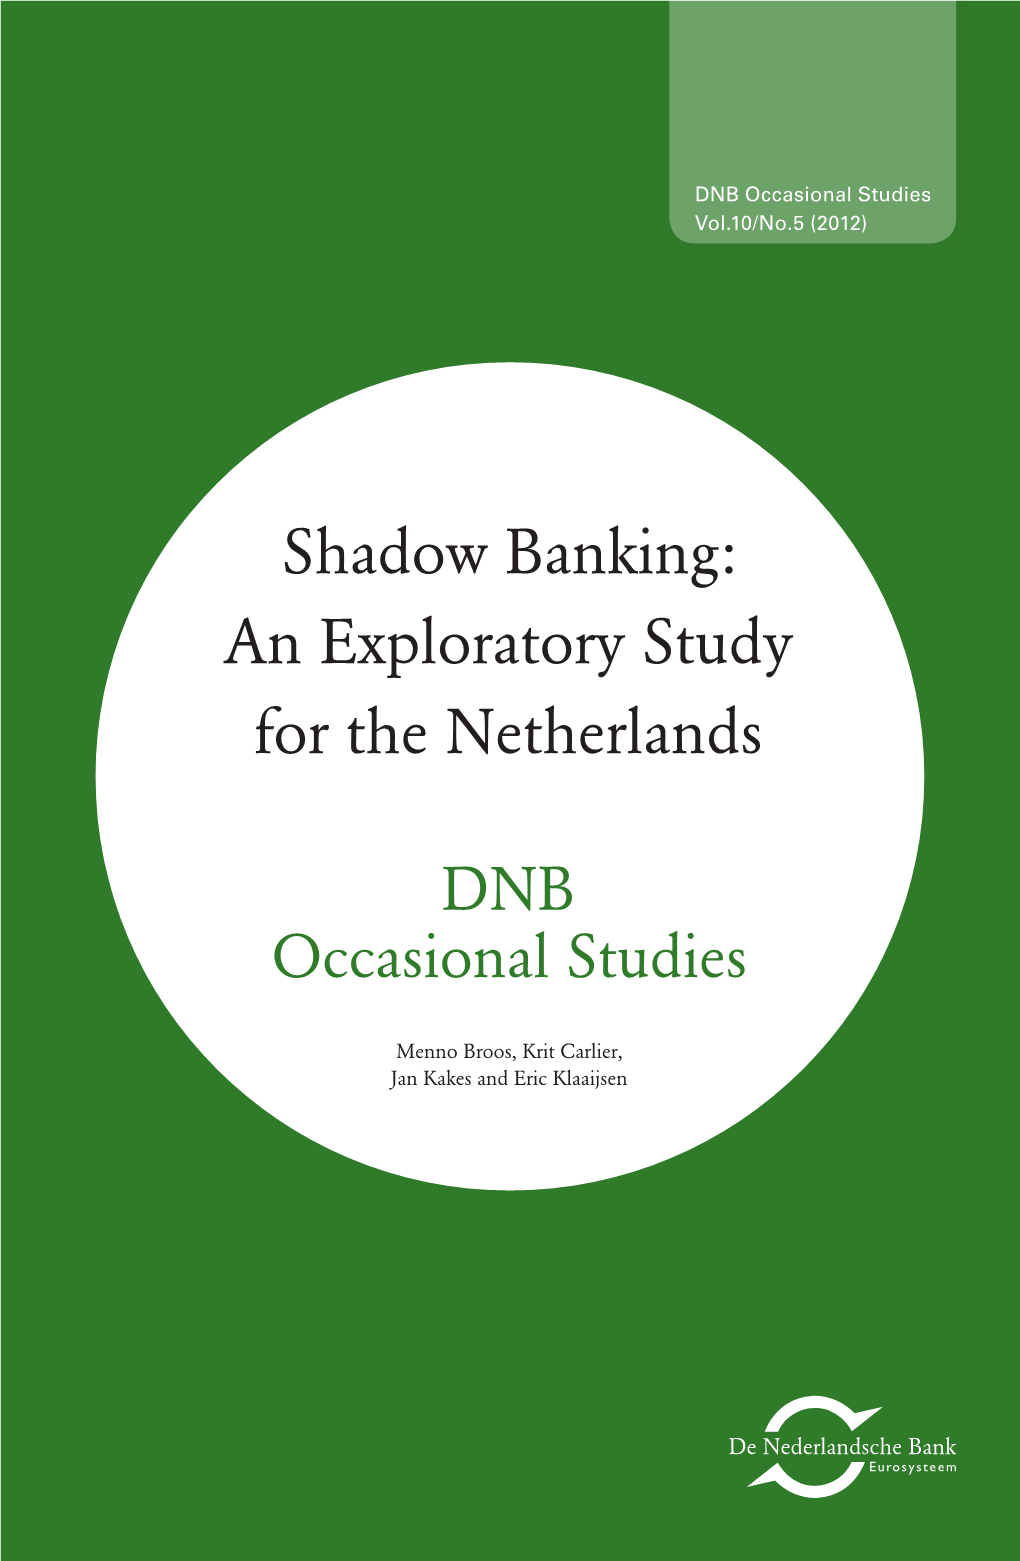 Shadow Banking: an Exploratory Study for the Netherlands